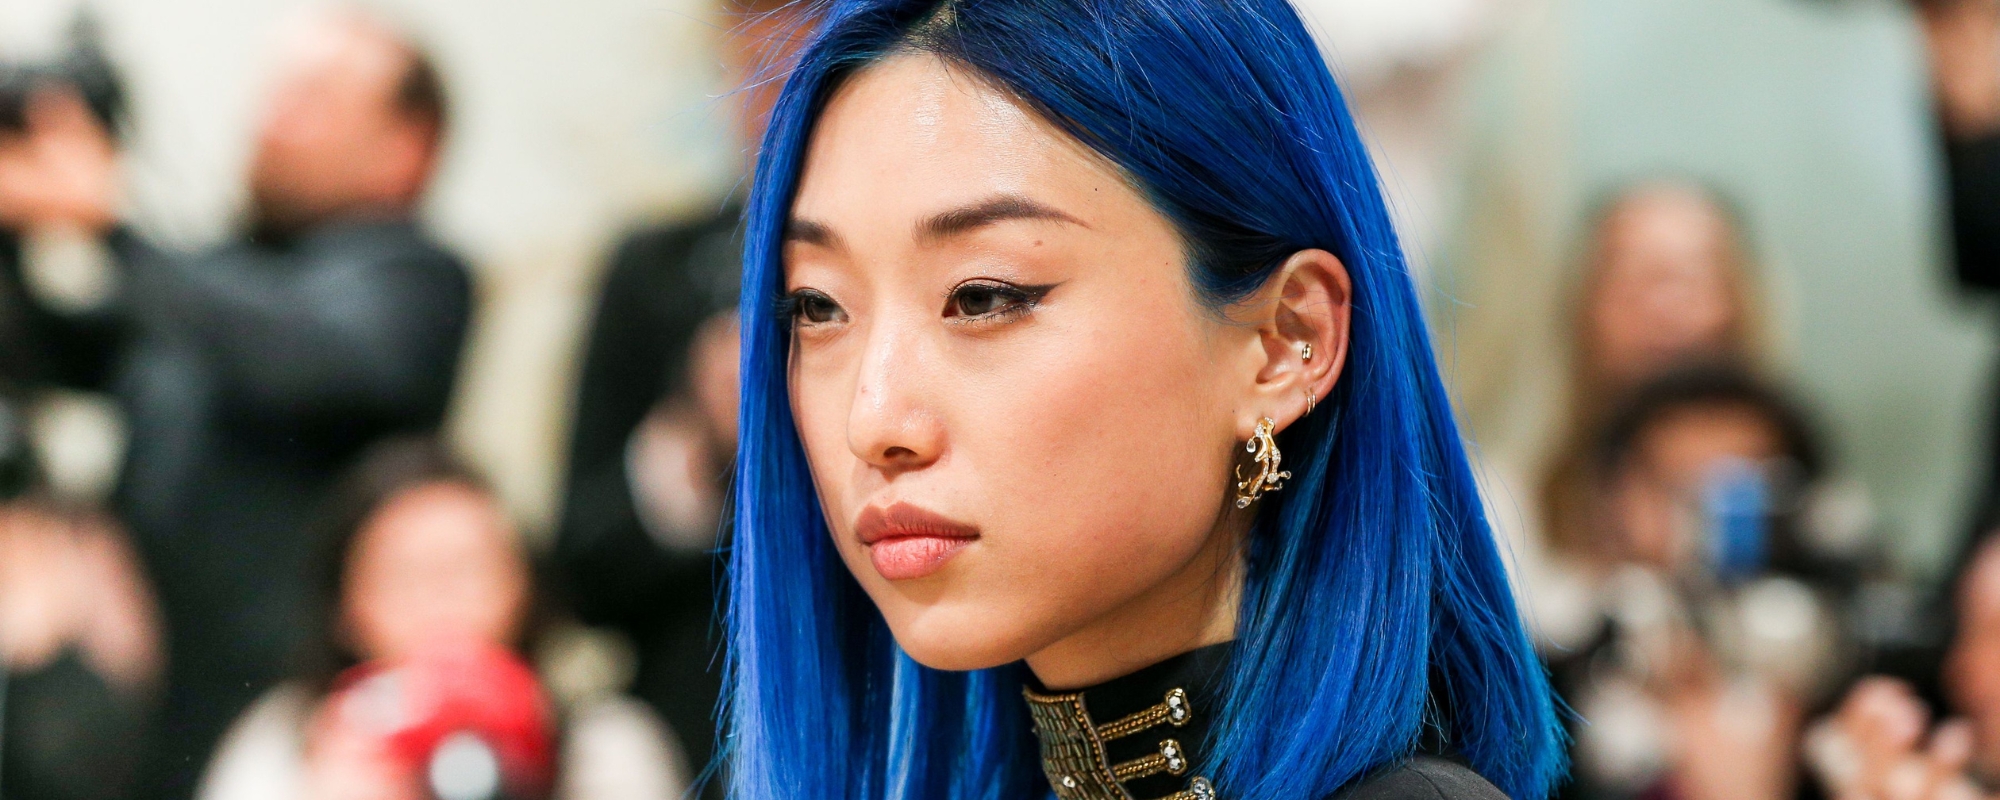 22 Celebs Who Rocked Blue Hair | All Things Hair UK